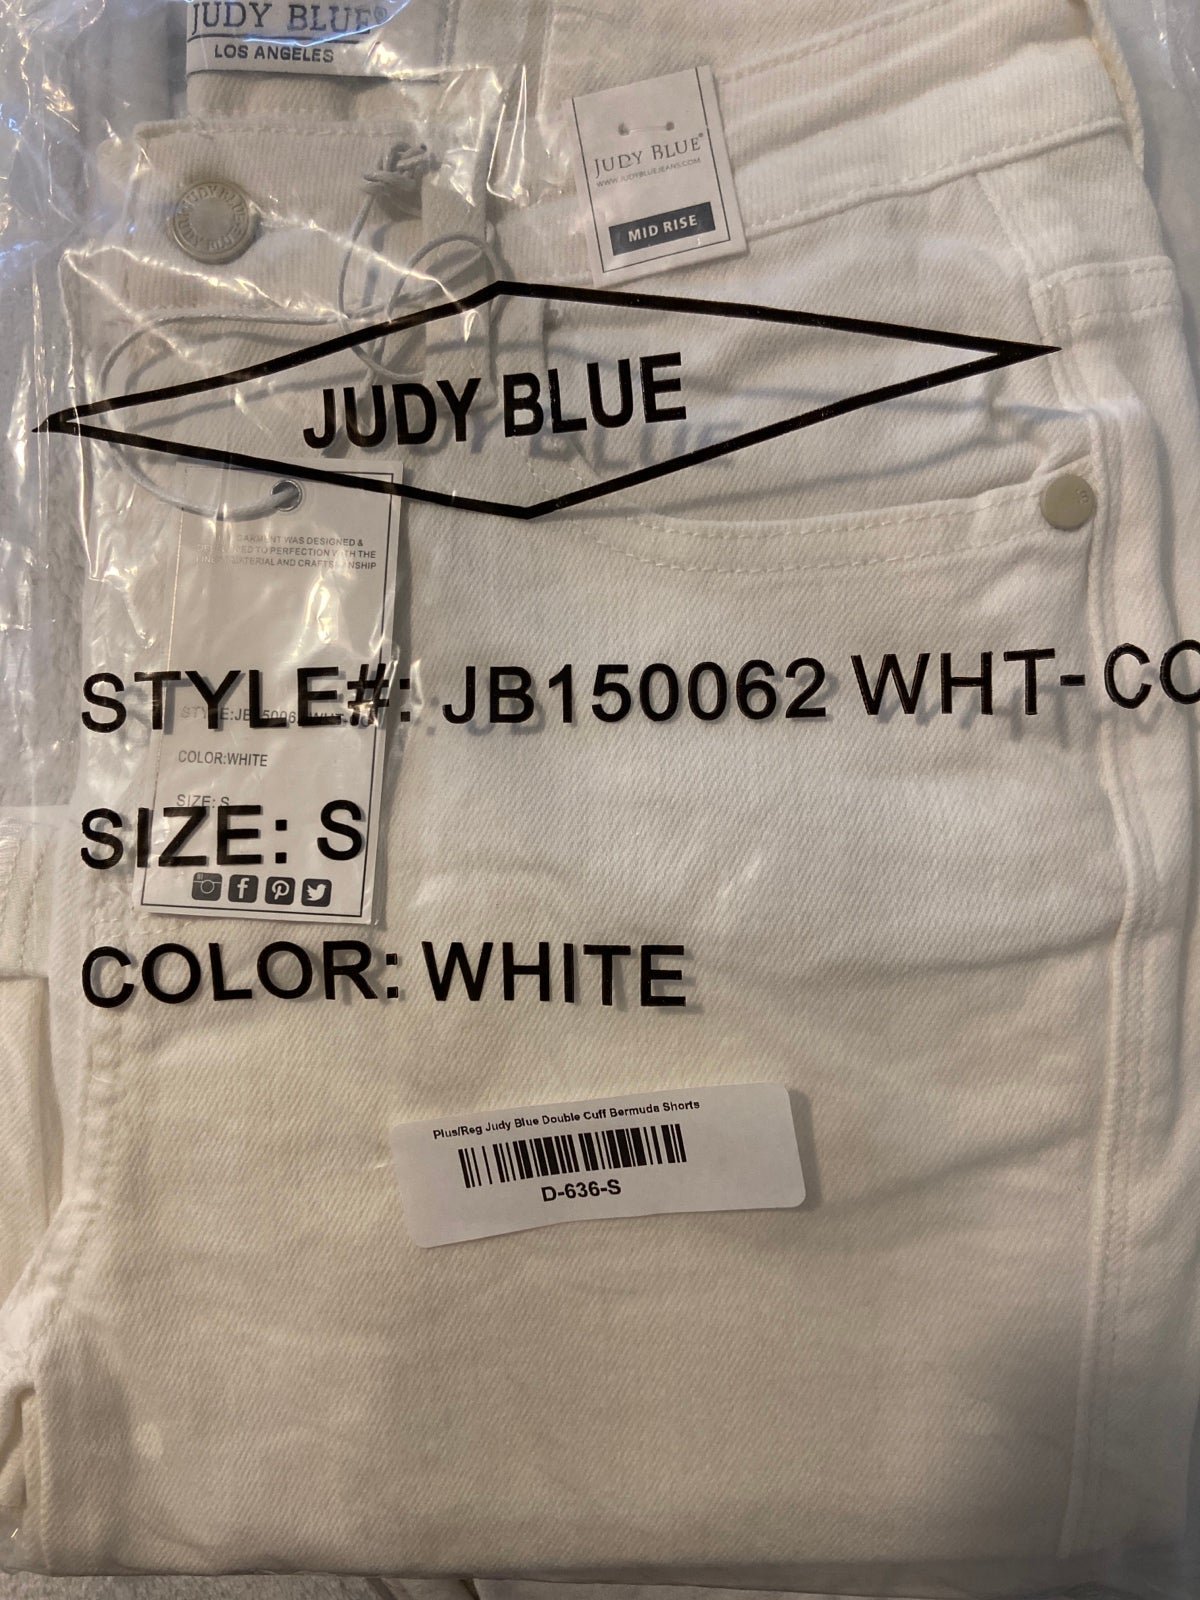 good price Judy blue shorts Judy blue jeans womens bermuda shorts white denim BRAND NEW NWT nJep1dX6w just for you